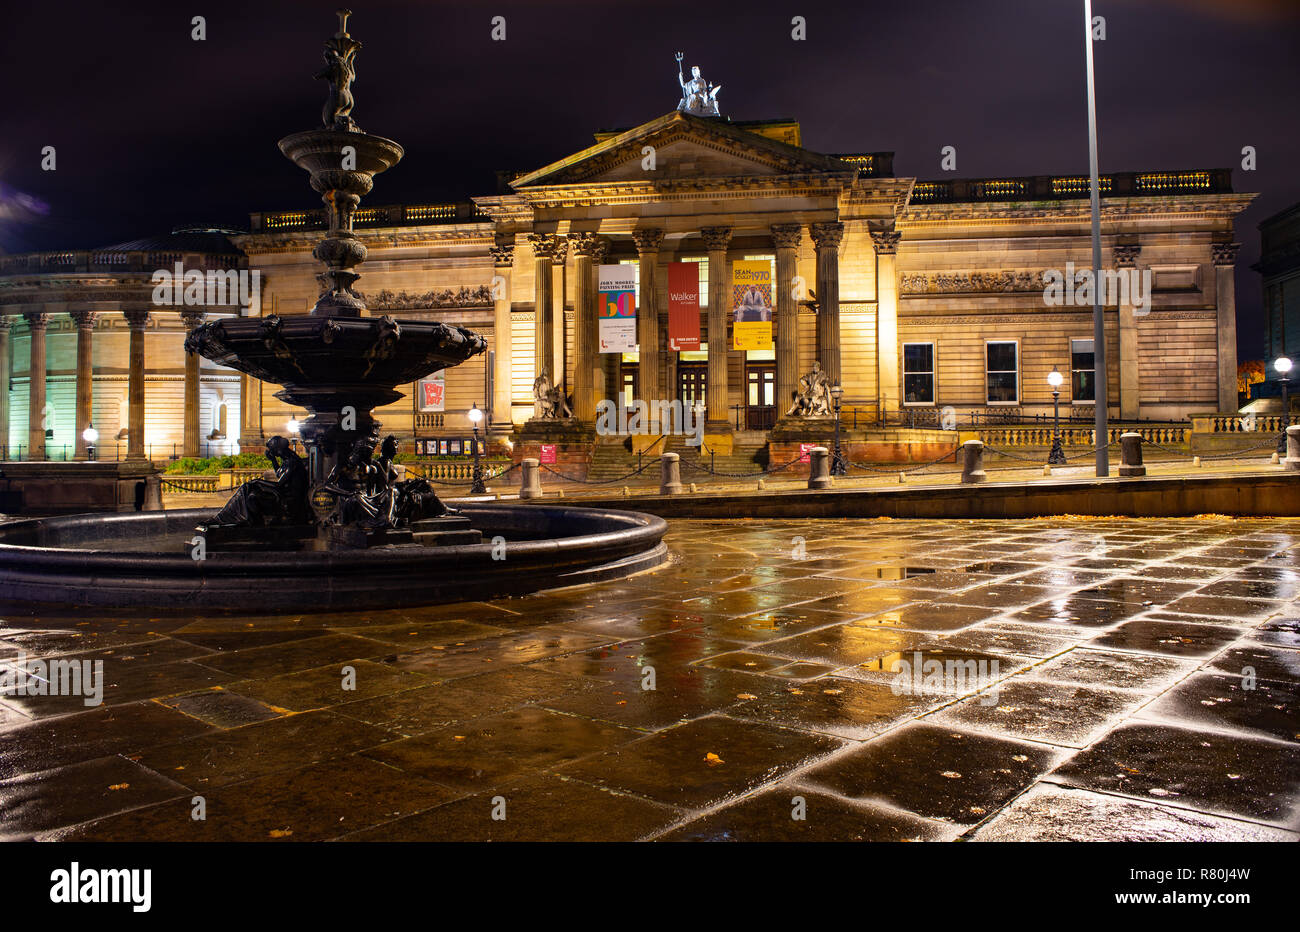 The Walker Art Gallery, Liverpool, with the Steble Fountain in foreground. Image taken in October 2018. Stock Photo